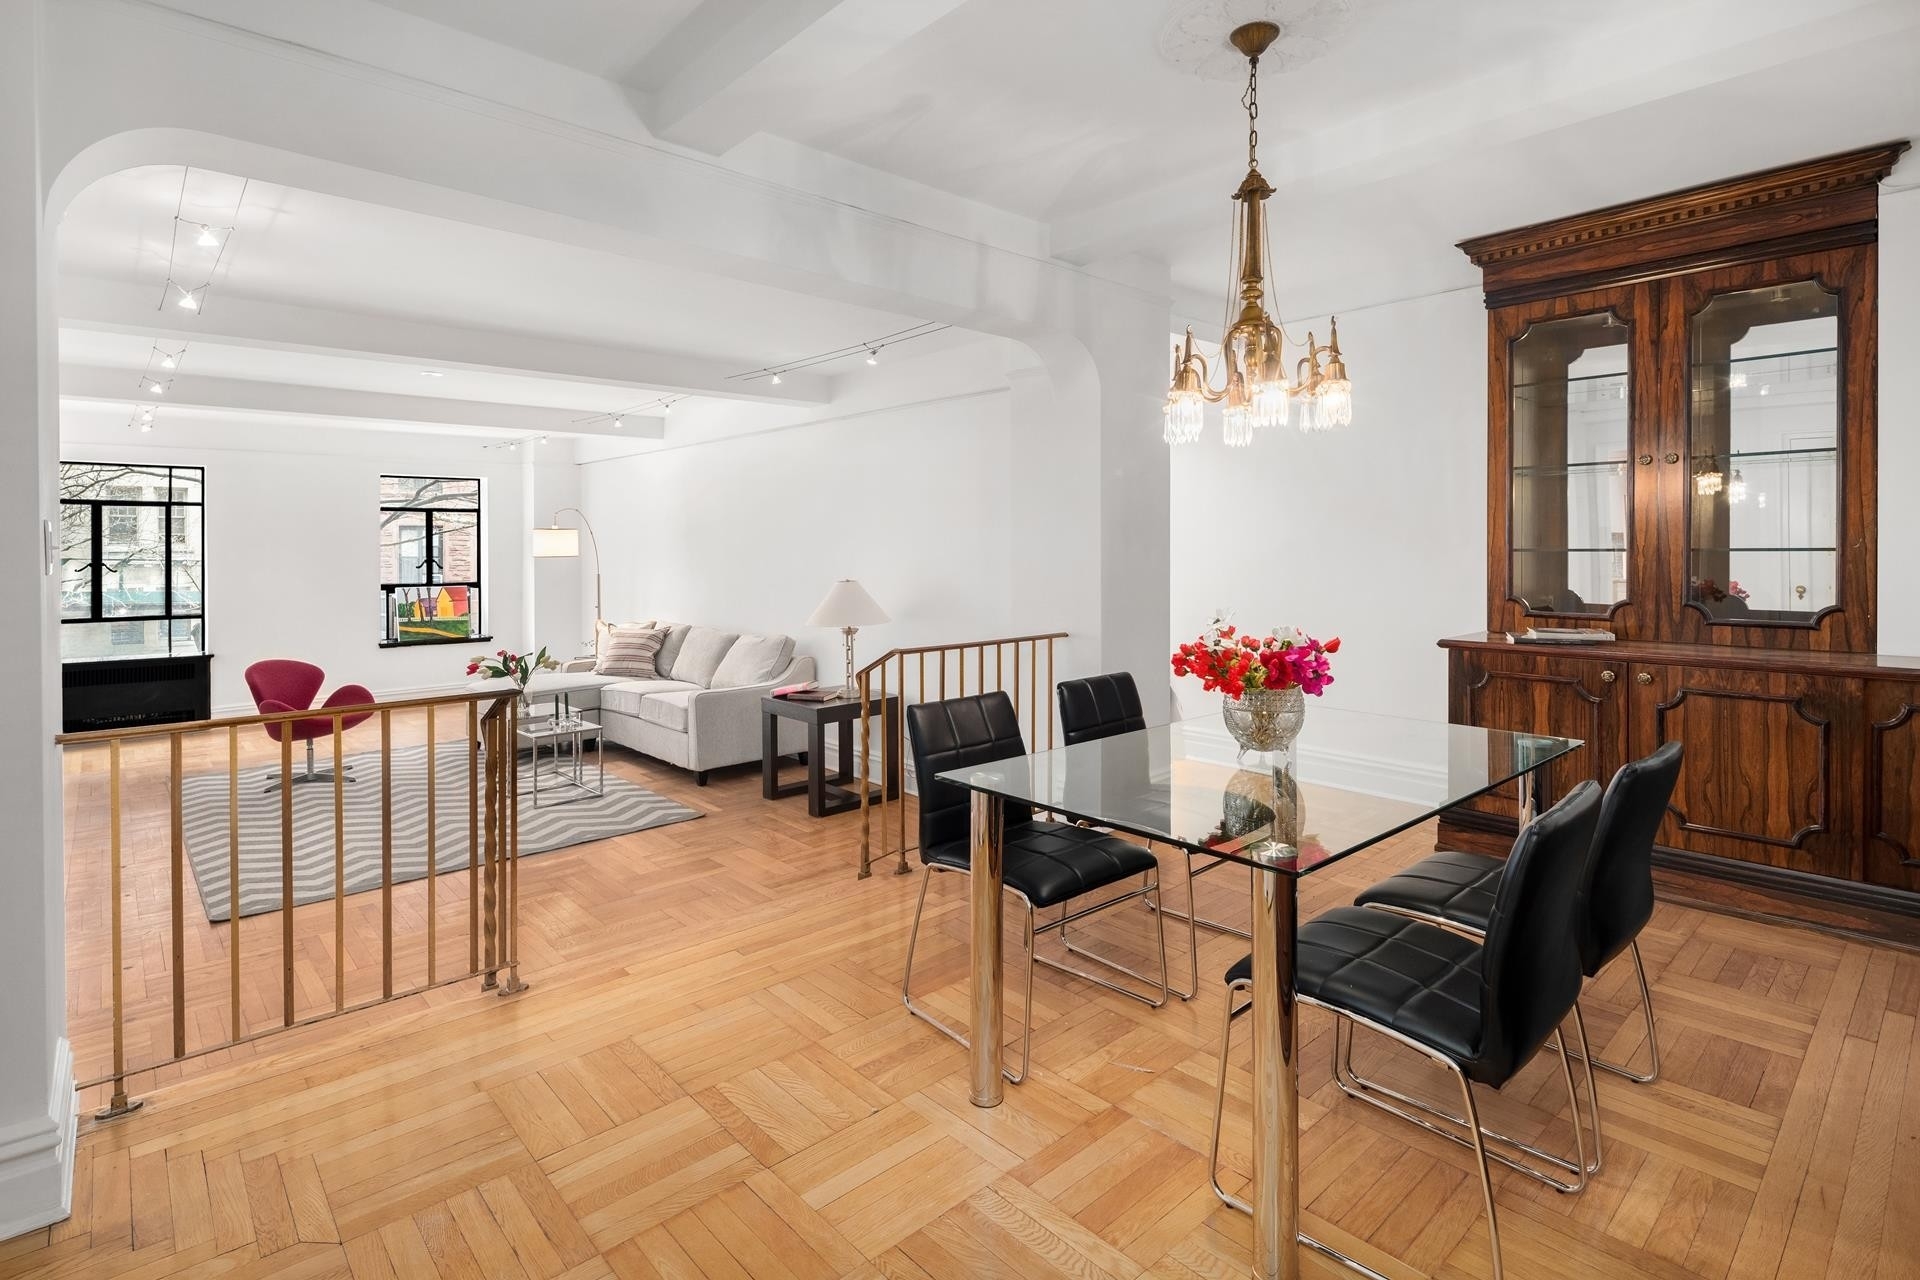 Co-op Properties for Sale at 565 W END AVE, 2A Upper West Side, New York, New York 10024